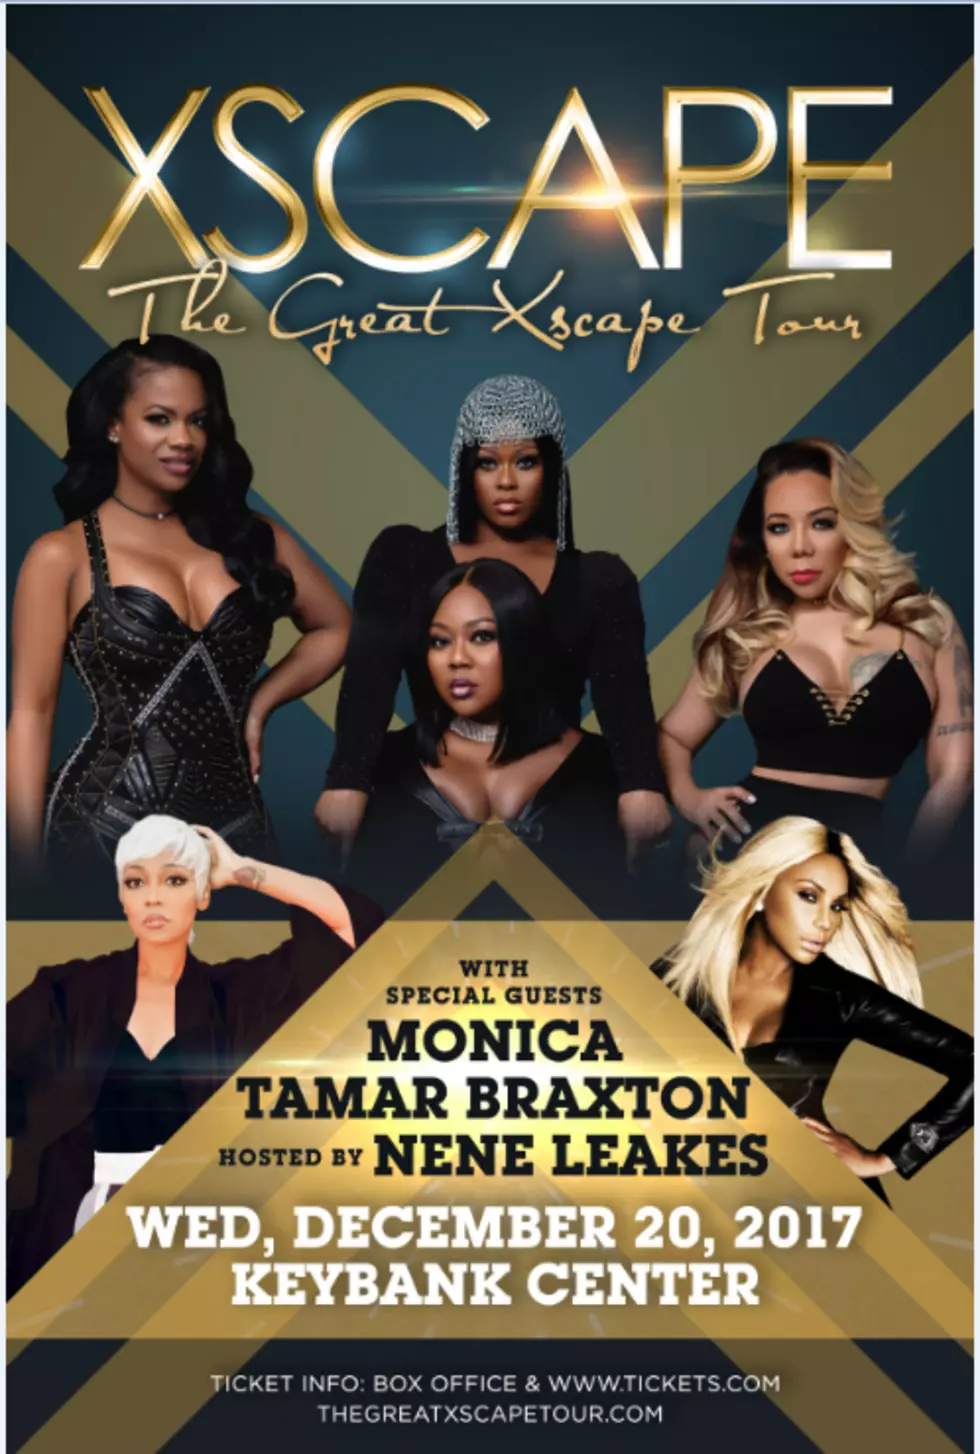 WBLK &#8216;ULTIMATE LADIES NIGHT OUT': featuring, &#8216;The Great Xscape Tour&#8217; w/ XSCAPE, MONICA, &#038; TAMAR BRAXTON&#8230;Hosted By NENE LEAKES